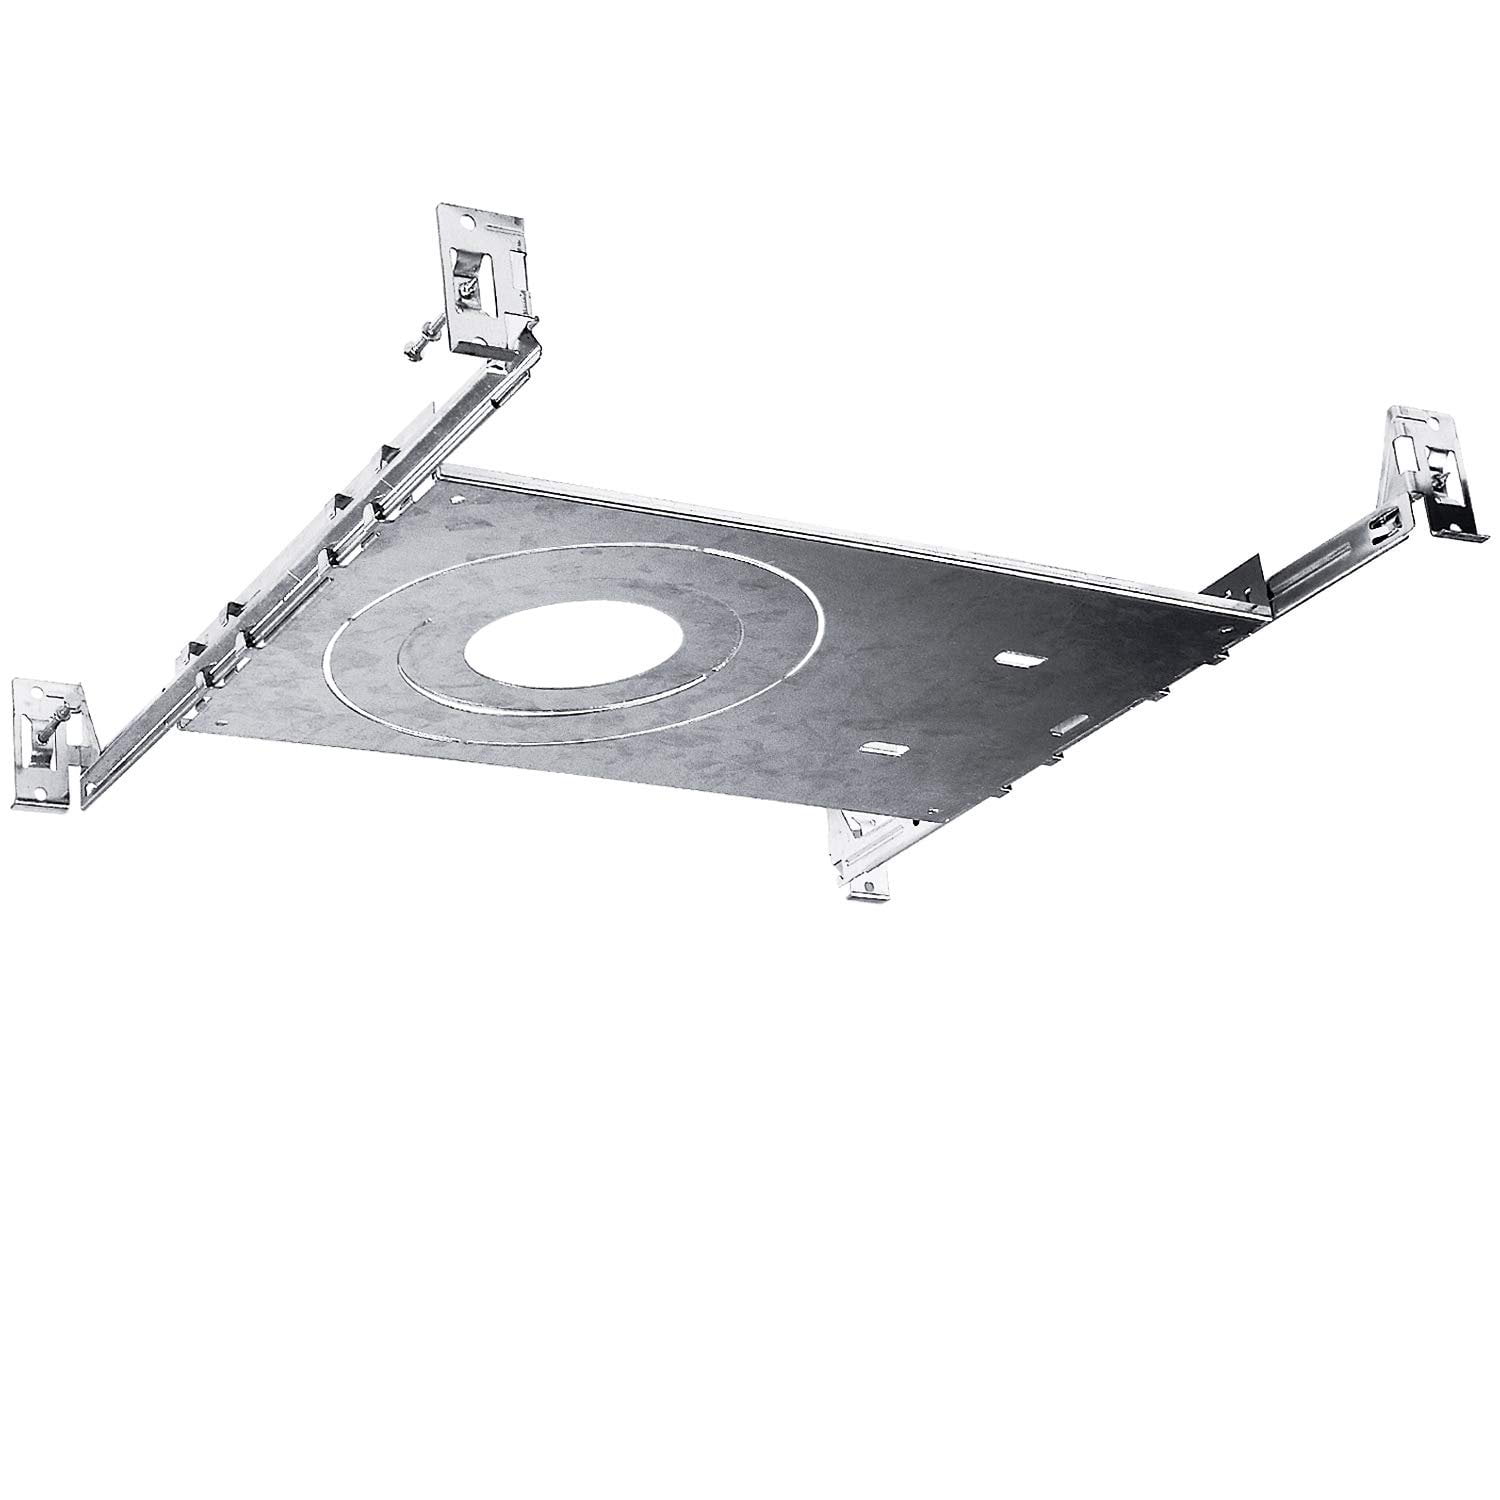 Led Recessed Lighting Kits, 4 Inch Recessed Lighting Led Housing